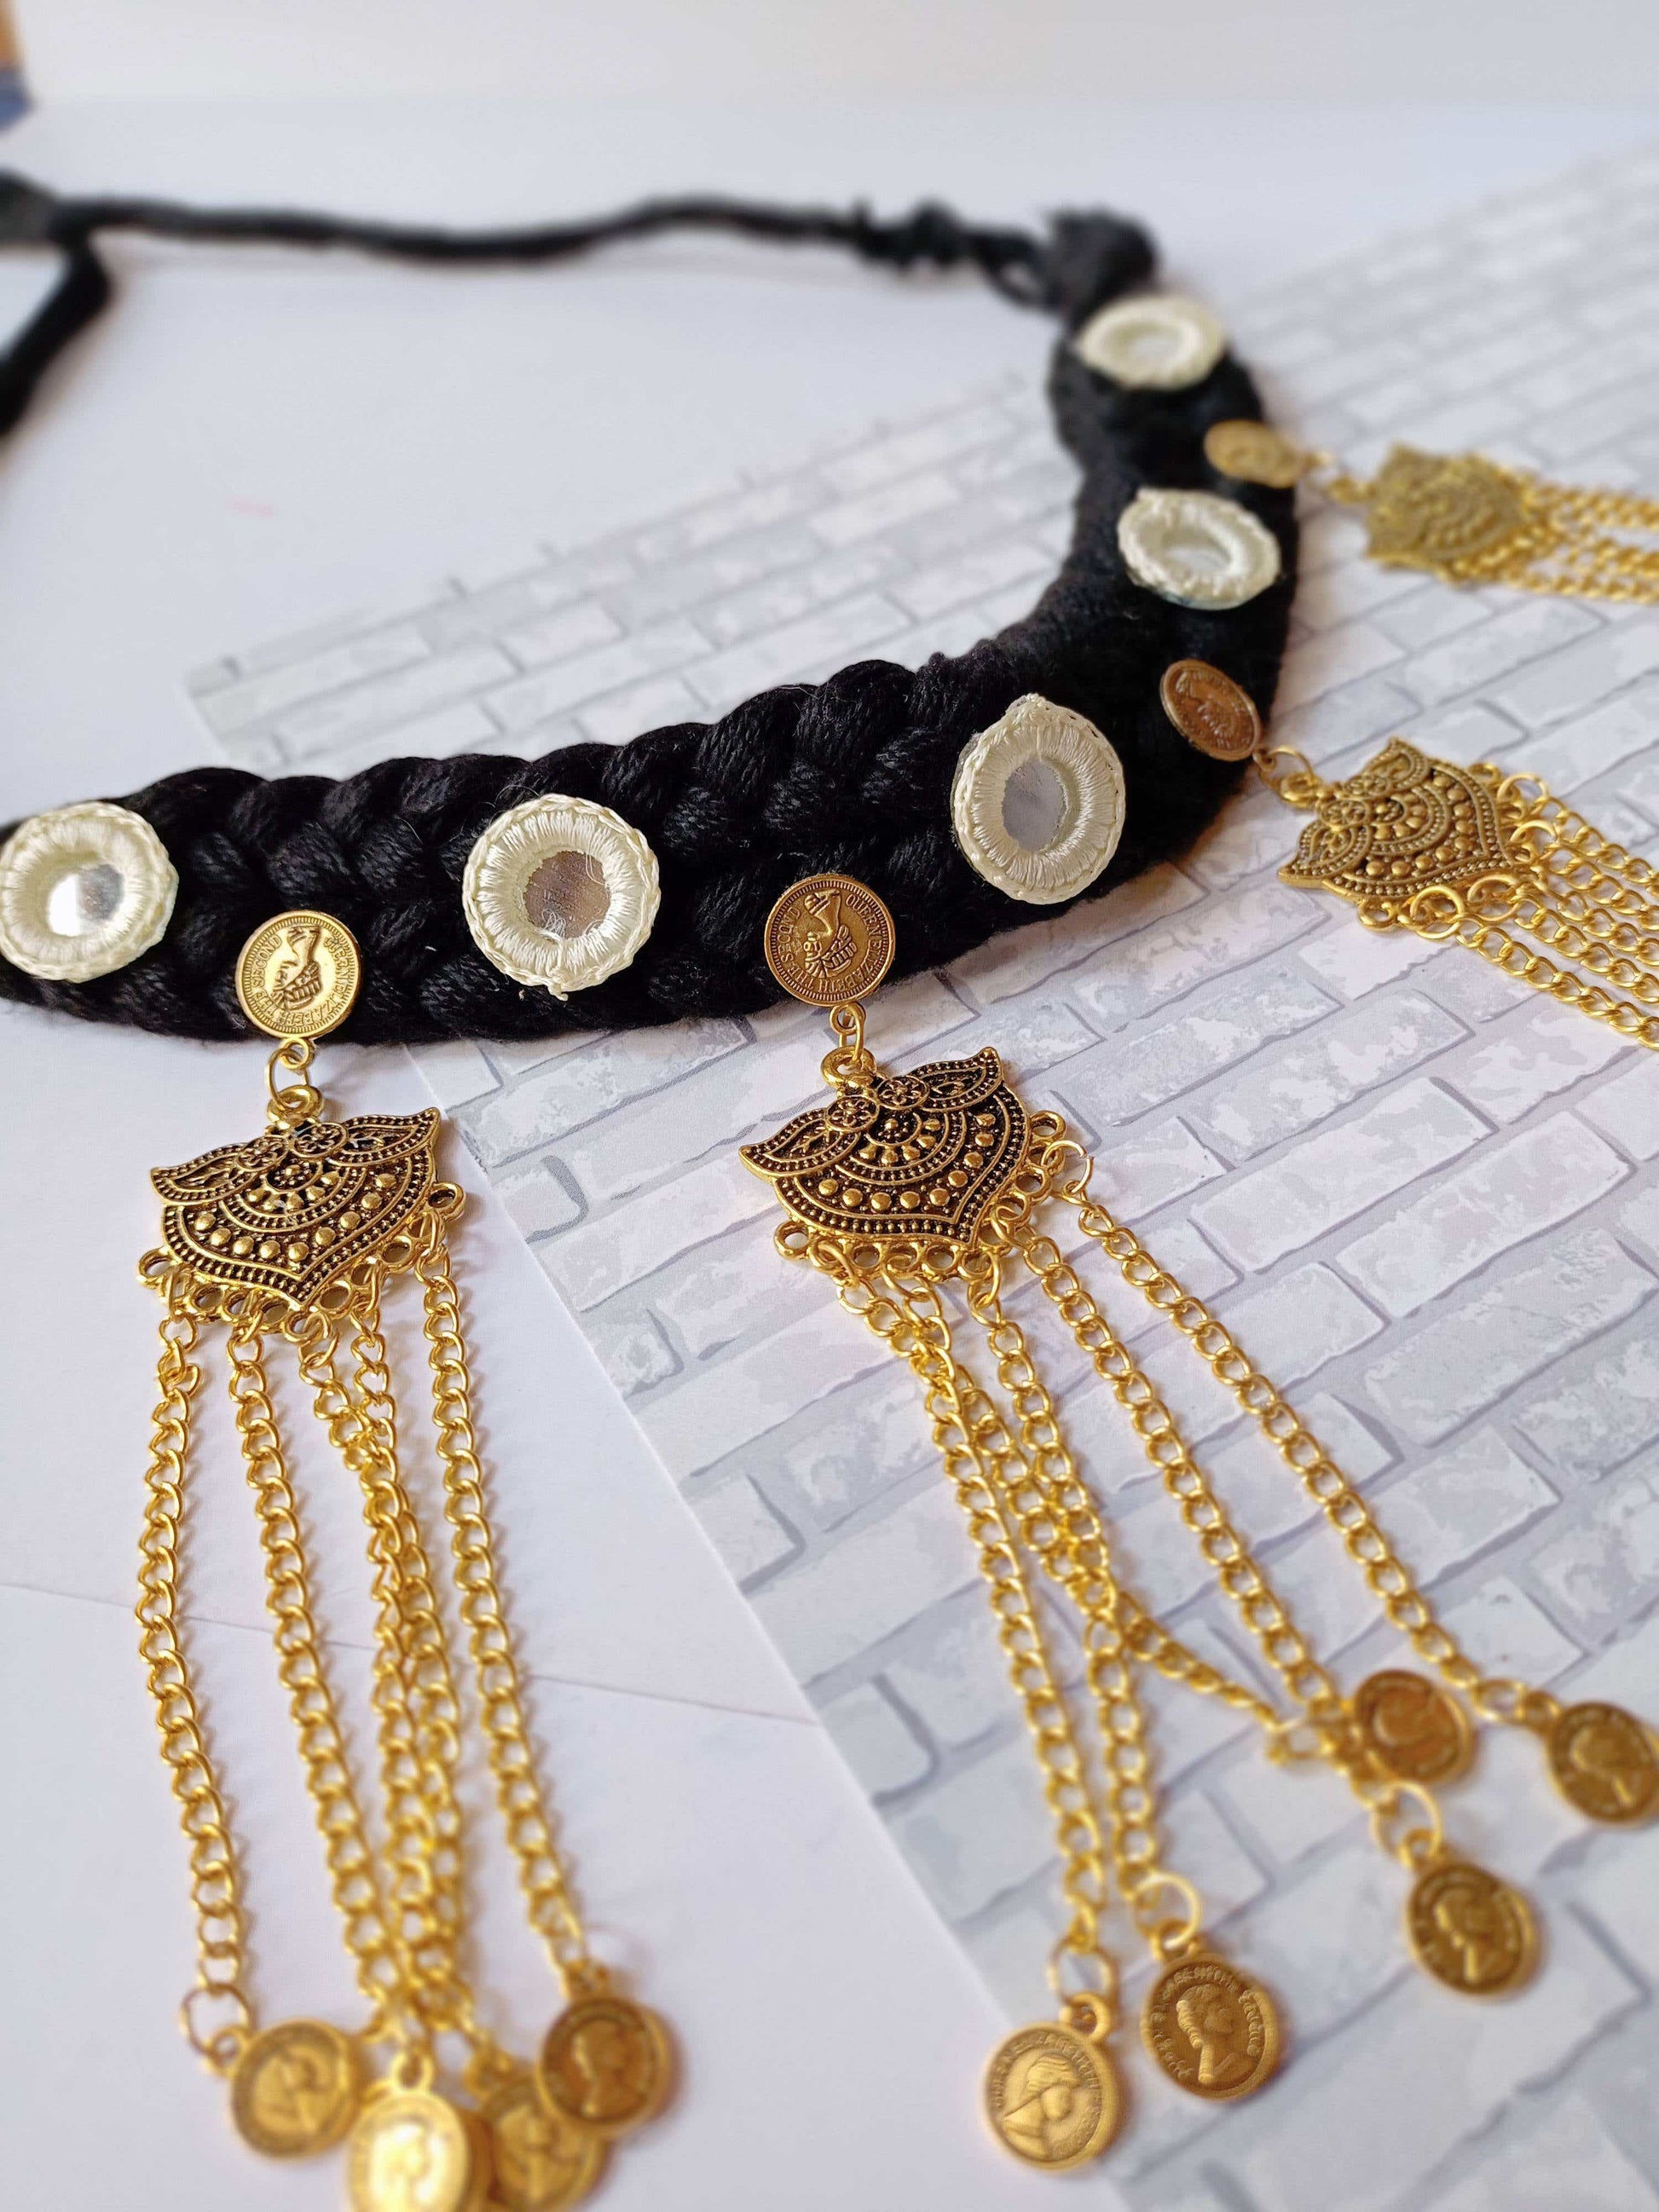 Black threads knitted choker wth golden latkan and mirrors on white backdrop